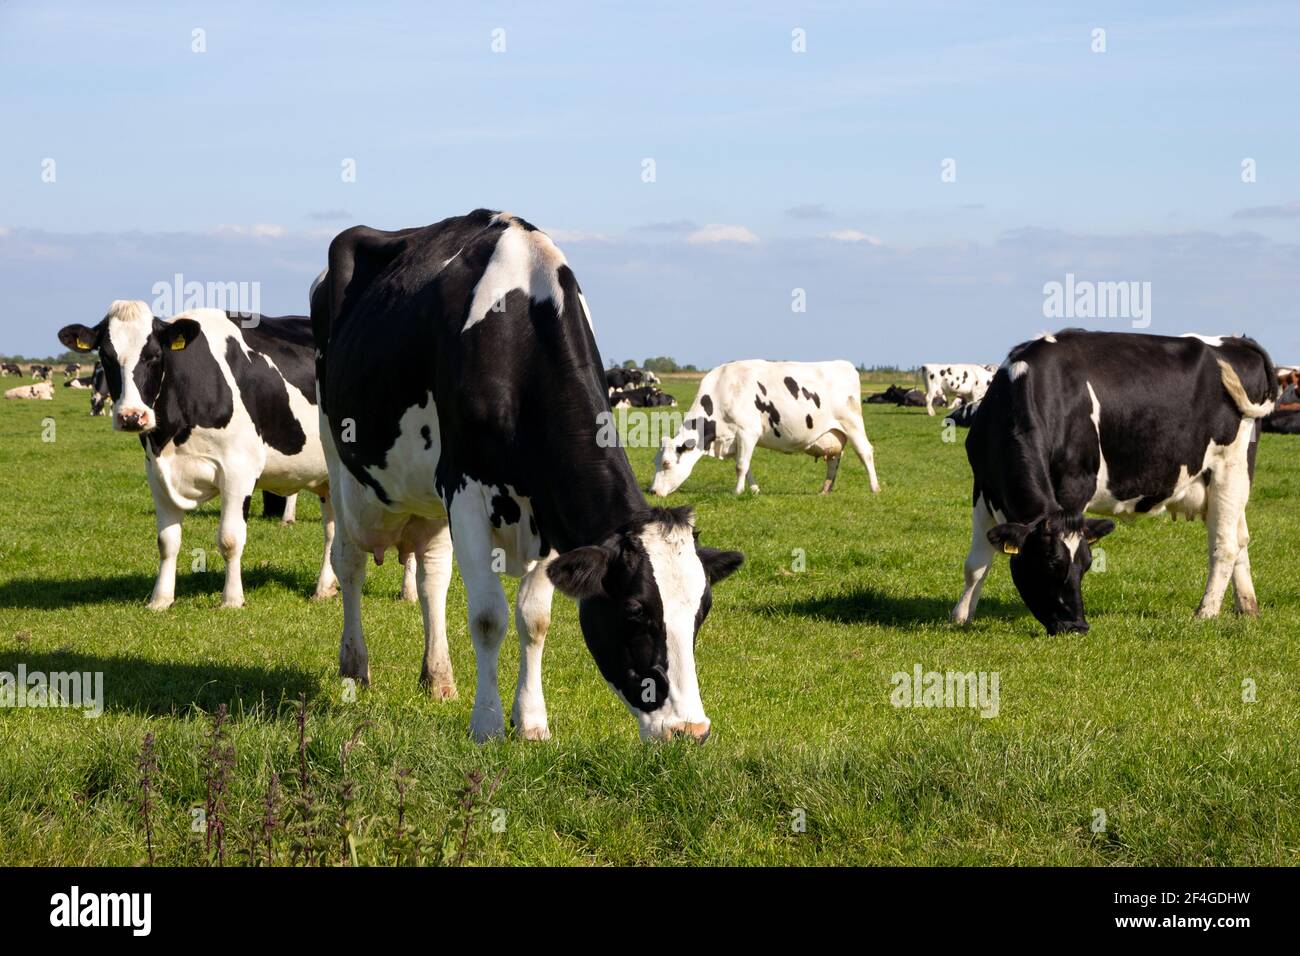 Black and white Holstein Friesian cattle cows grazing on farmland. Stock Photo